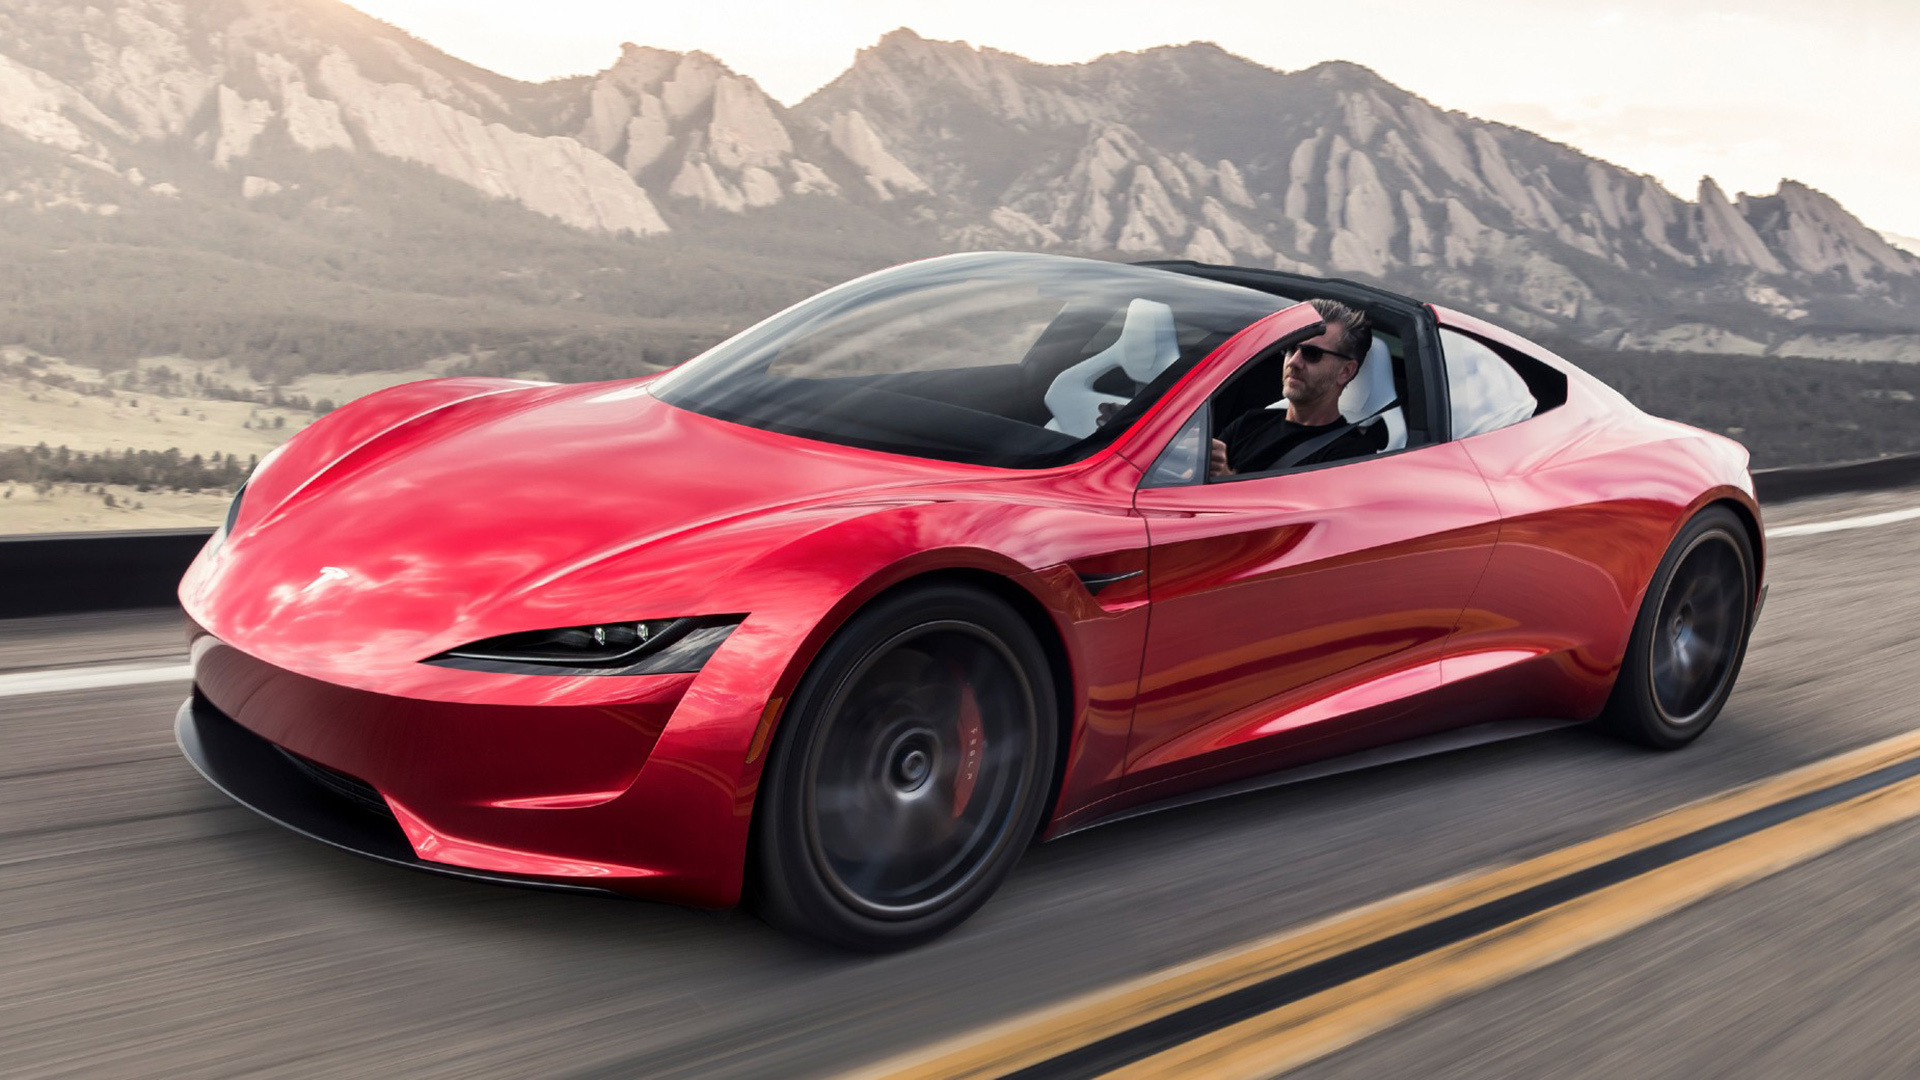 Elon Musk Says The Tesla Roadster Will “Hopefully” Hit Production In